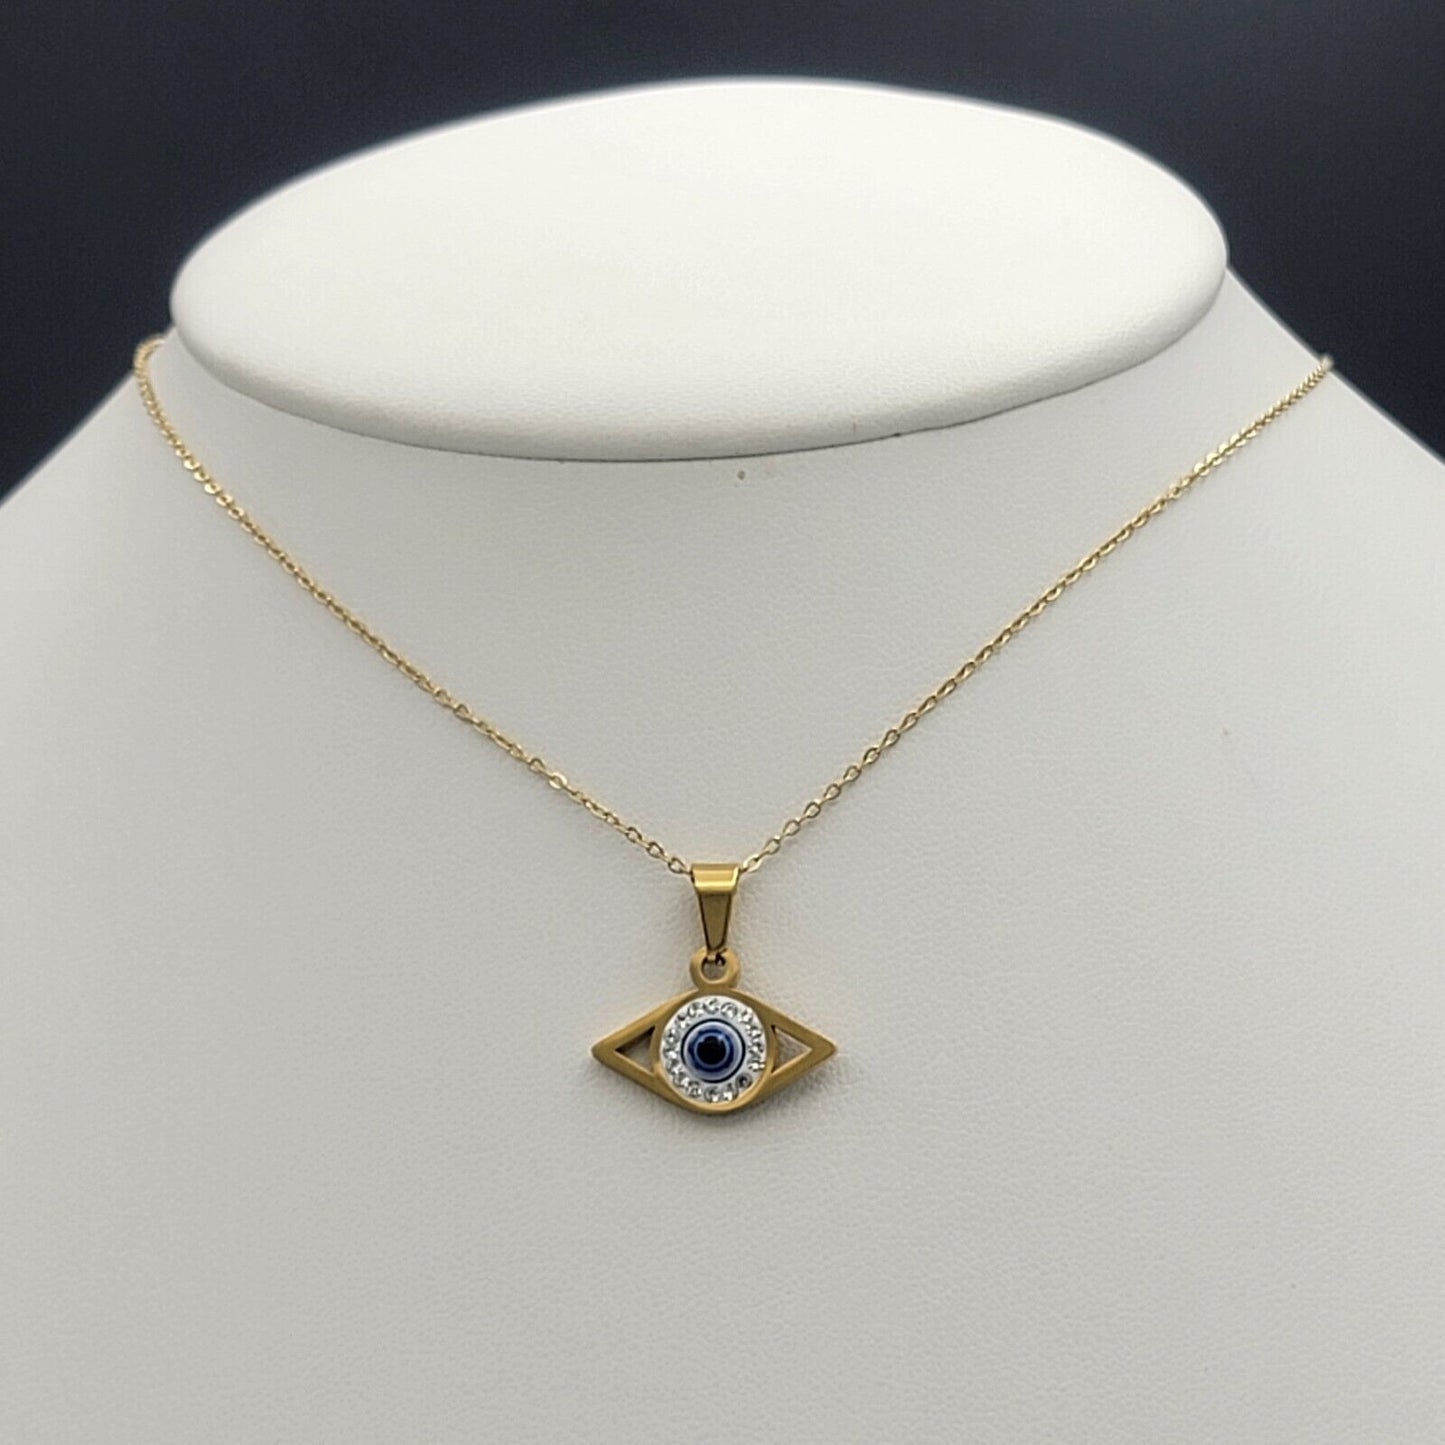 Necklaces - Stainless Steel Gold Plated. Blue Black Eye Pendant & Chain.